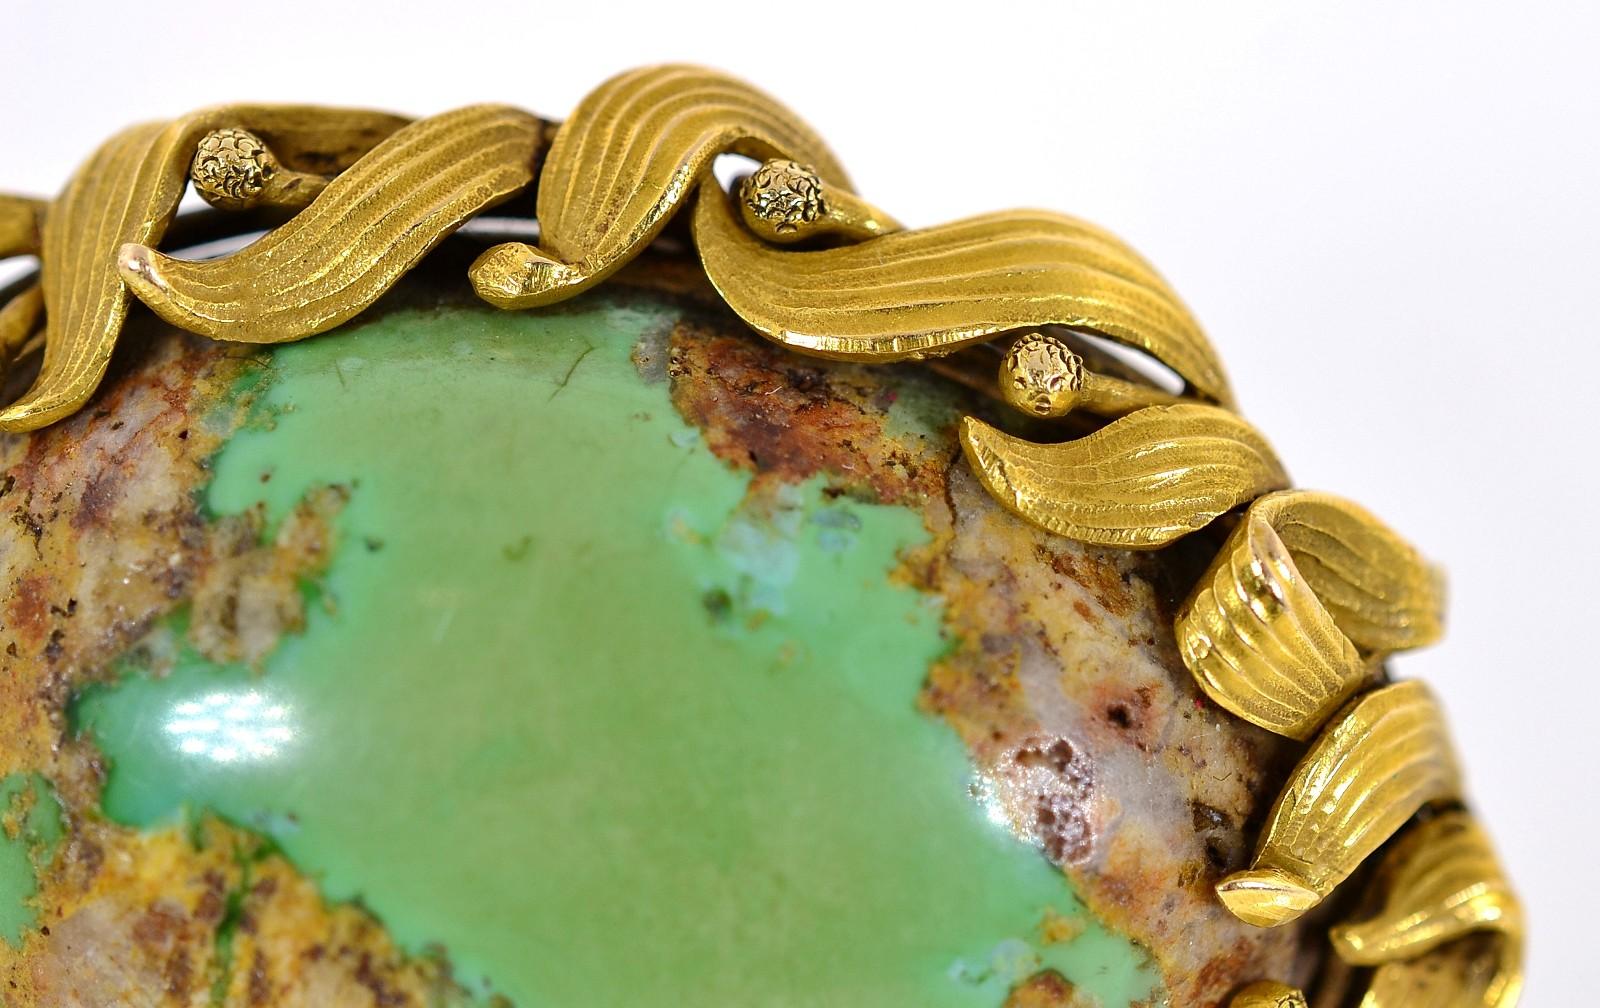 A unique Art Nouveau  natural green Turquoise oval brooch.   The Turquoise flaunts its organic golden inclusions and is set in a 14KT yellow gold frame of flowing leaves, enhanced by a time worn soft patina.  The brooch can also be worn as a